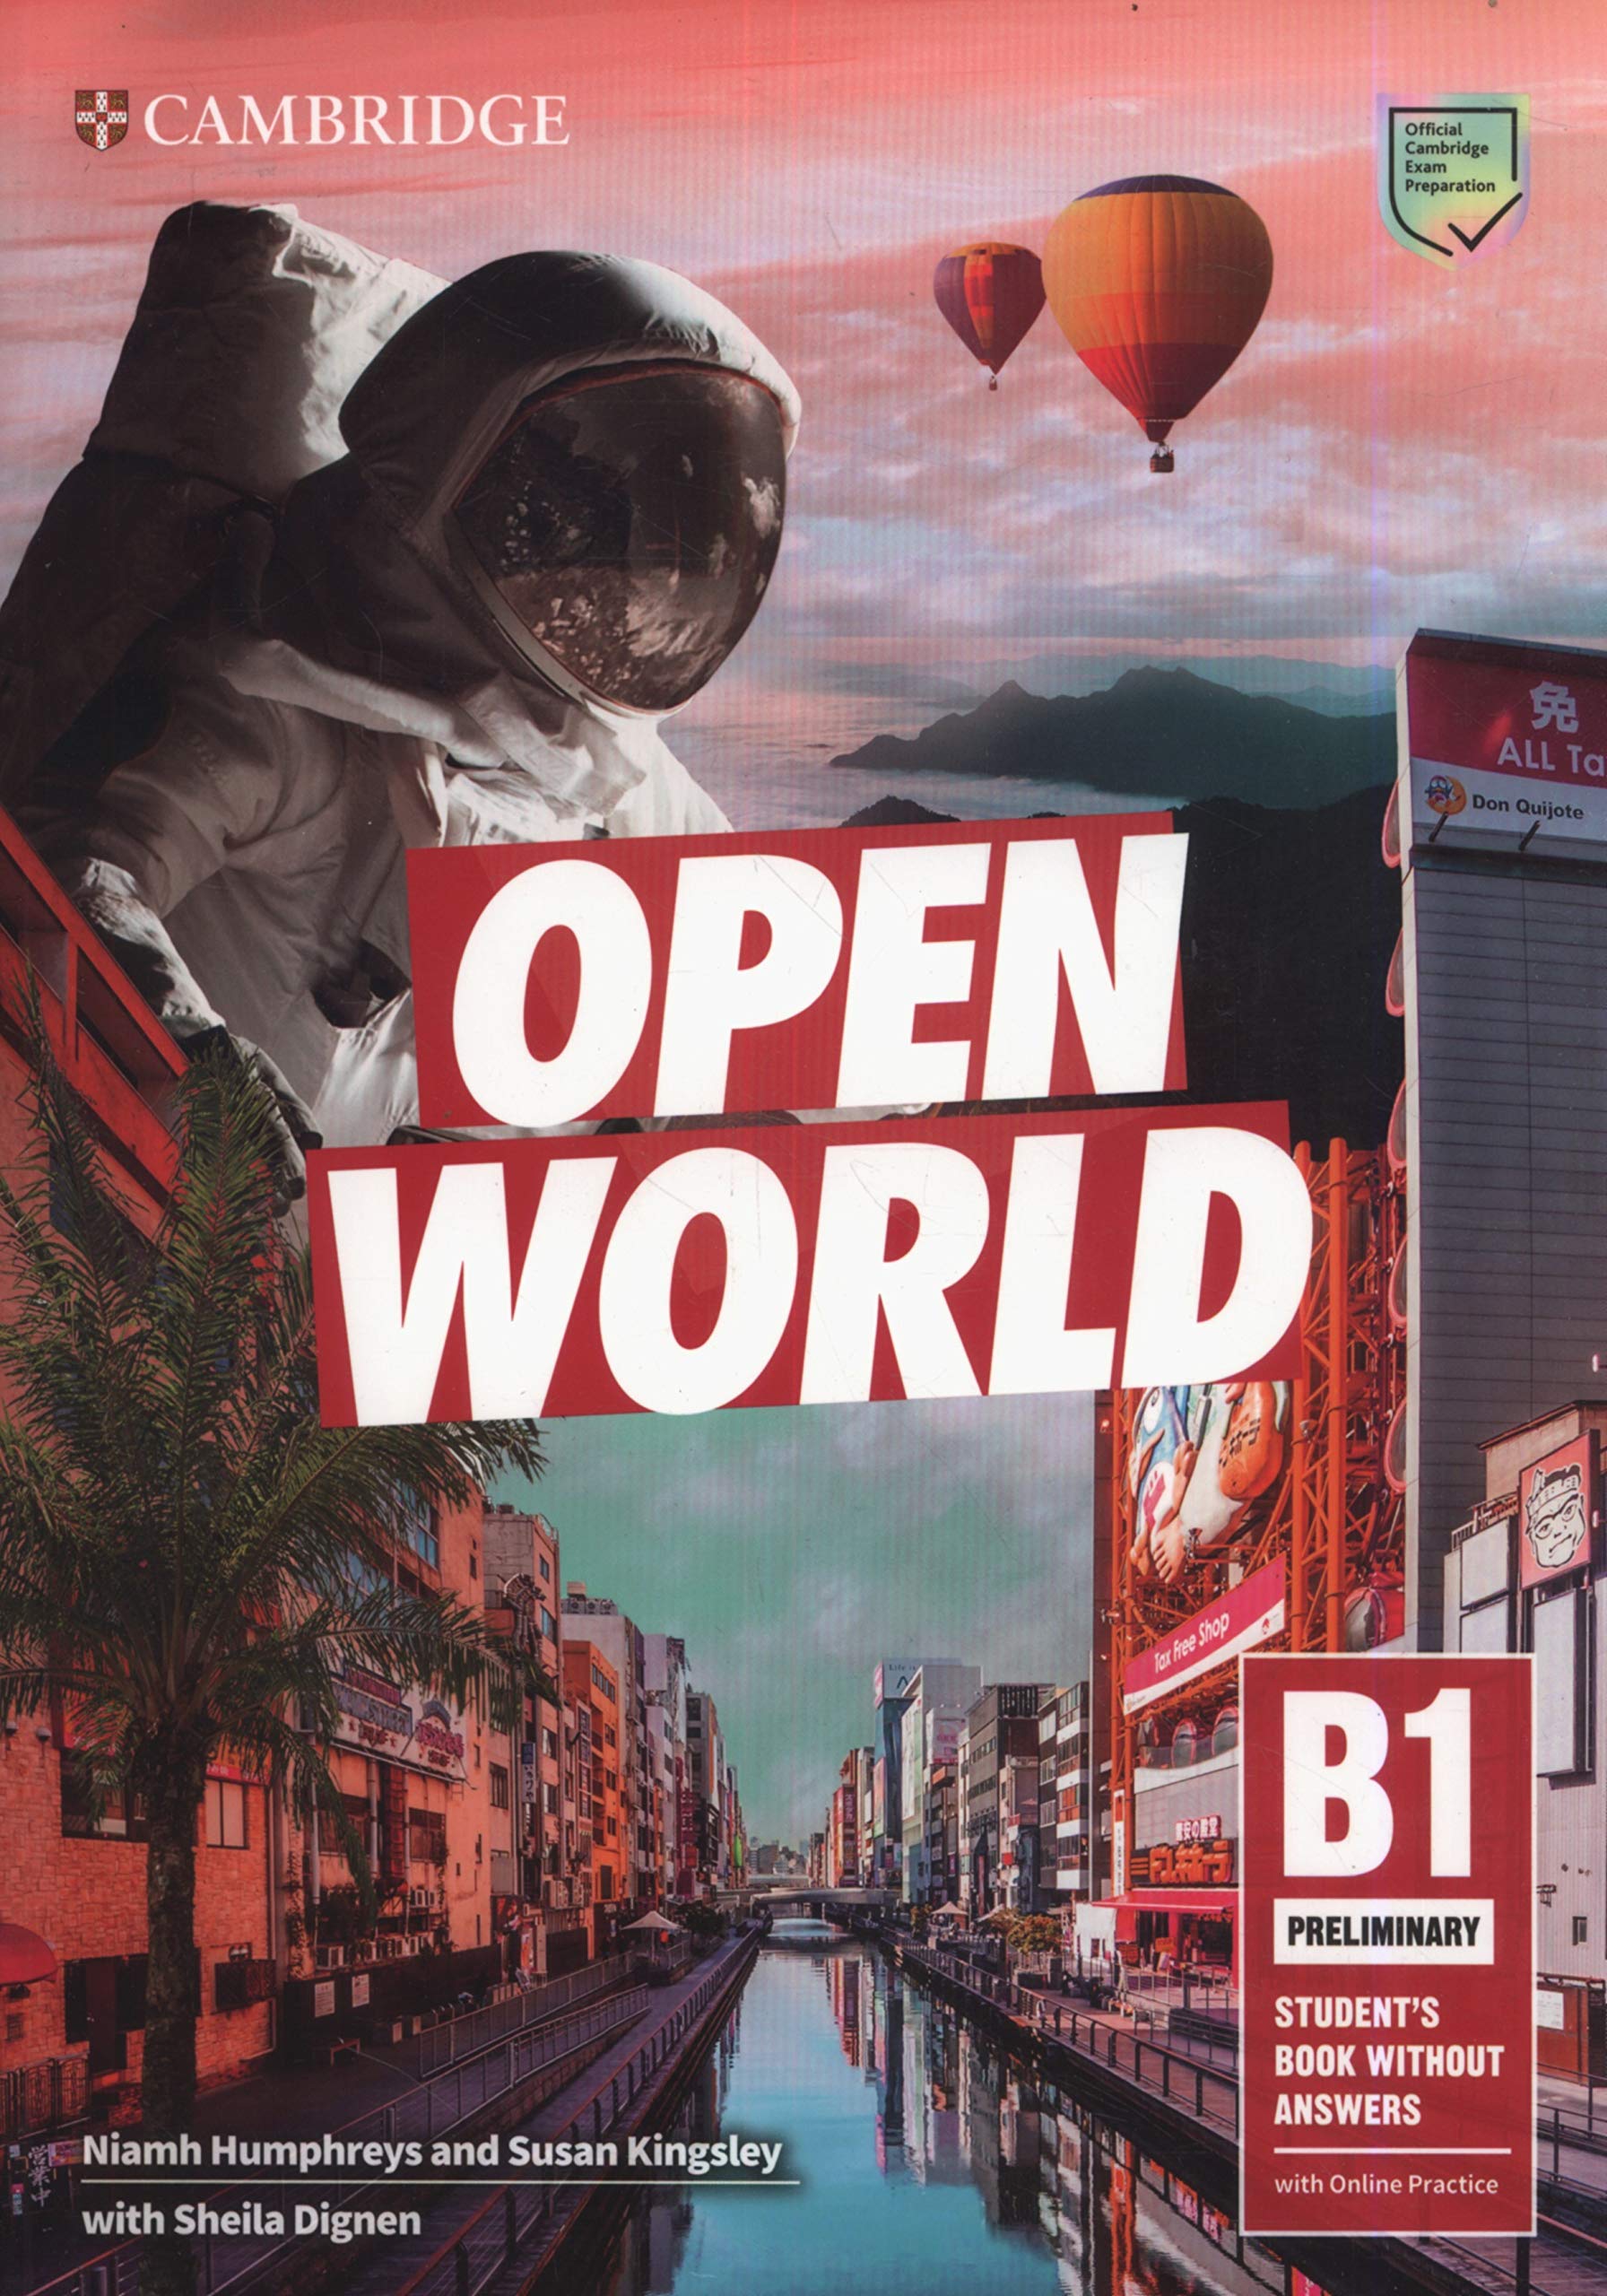 OPEN WORLD PRELIMINARY Student's Book without Answers + Online Practice